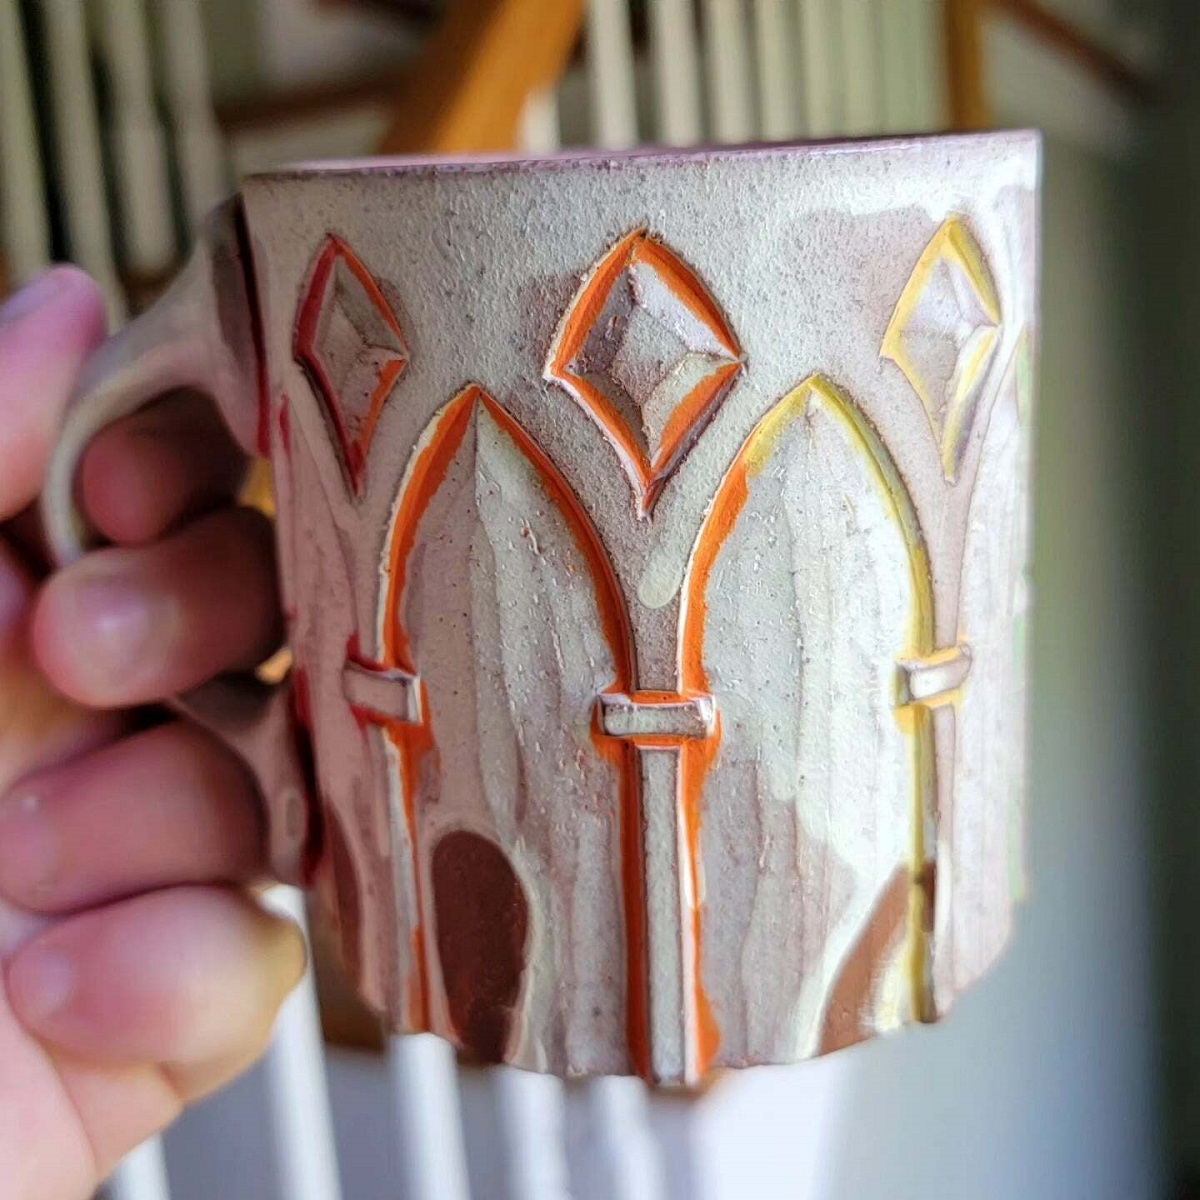 The Images Didn't Upload Properly The First Time I Tried Posting This, But Look At My New Mug!! It Was Made By Horacio Casillas